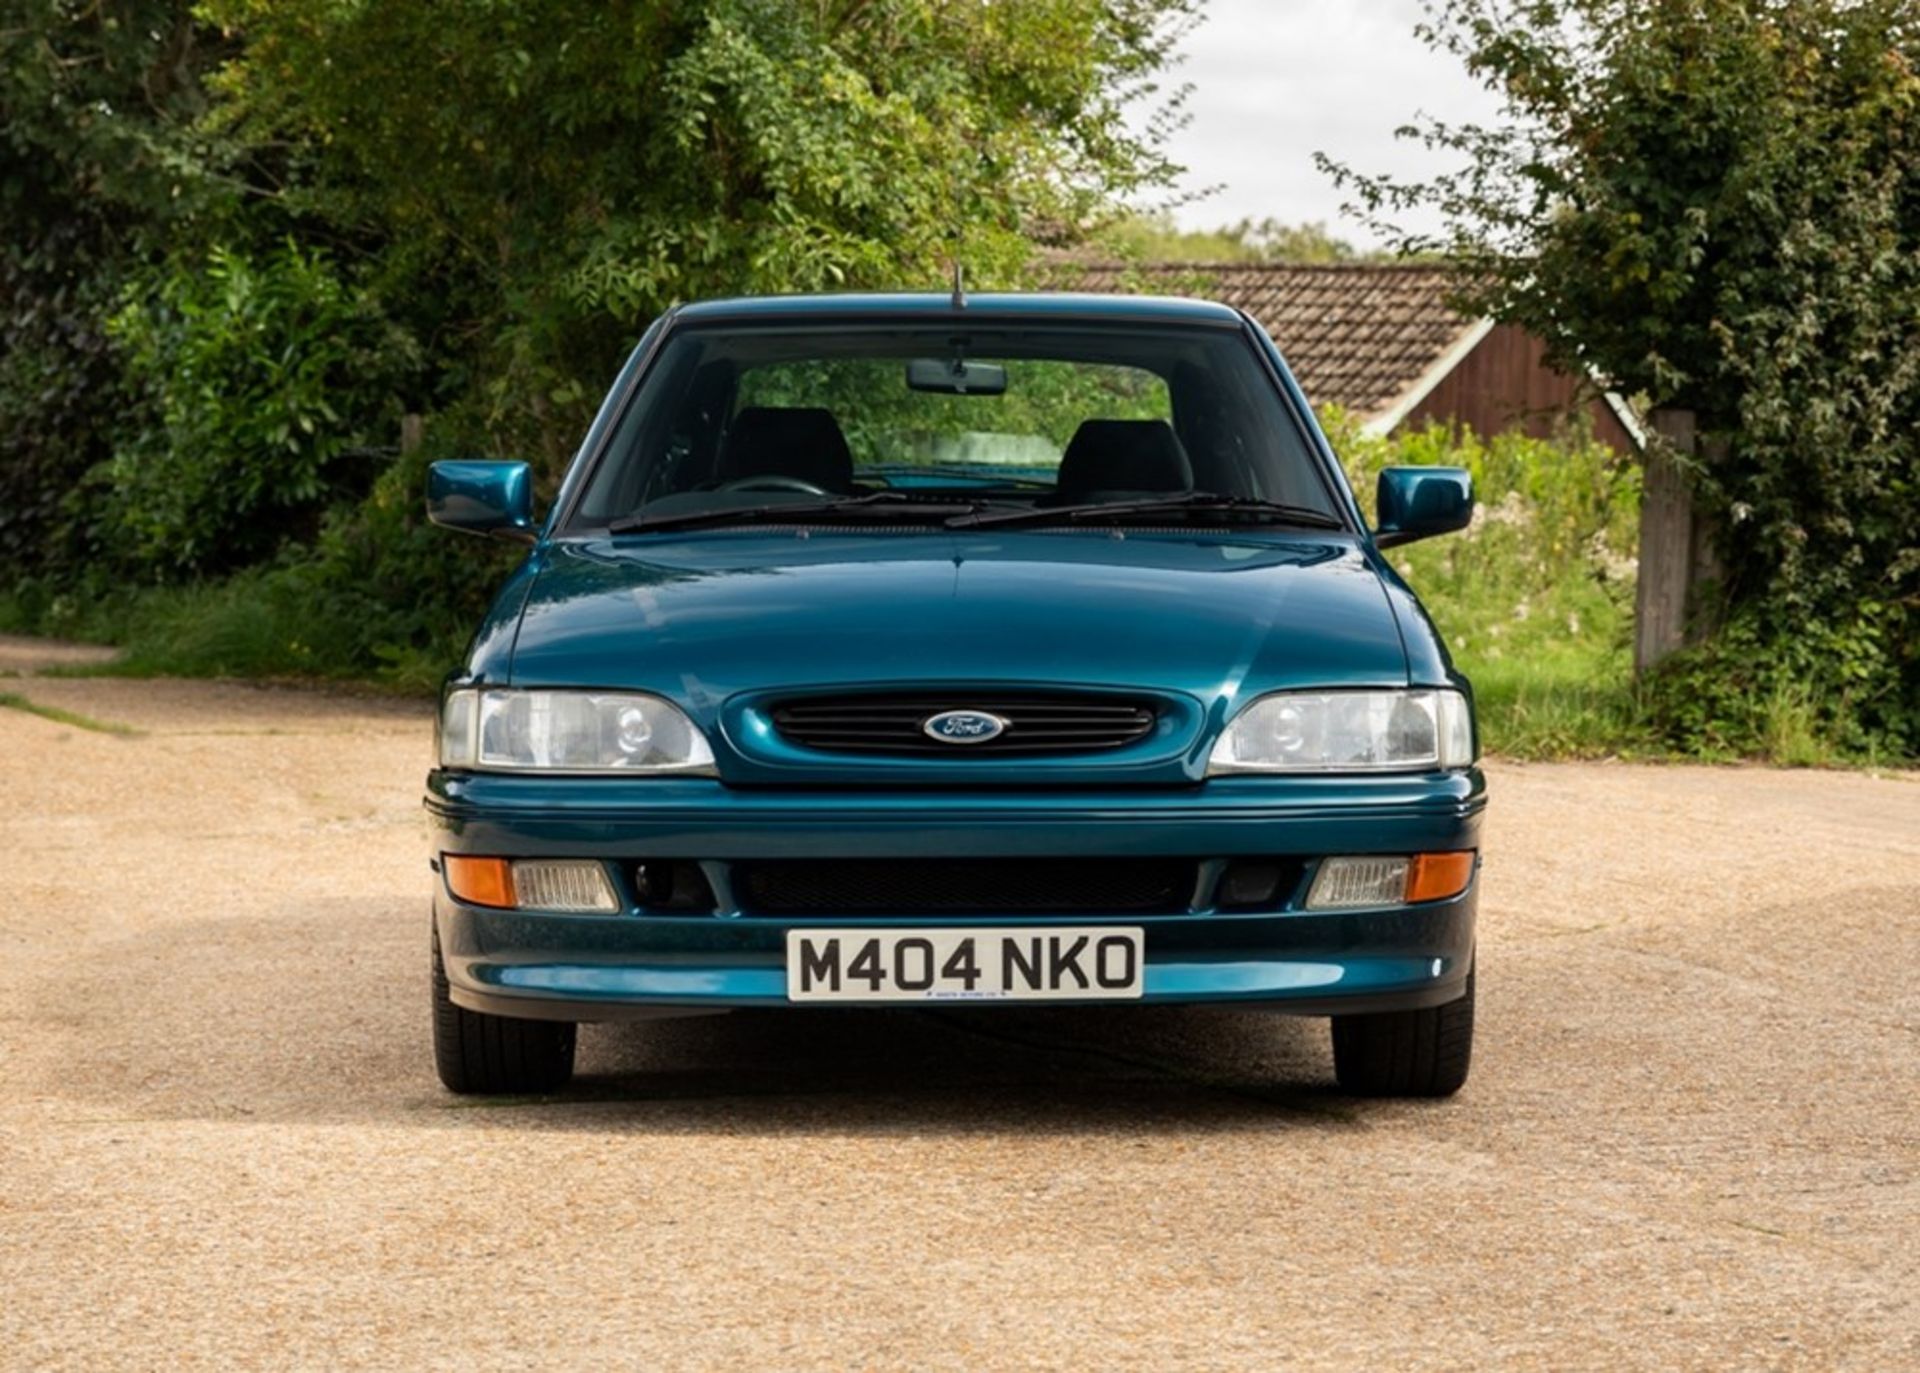 1994 Ford Escort RS2000 4x4 - Image 5 of 9